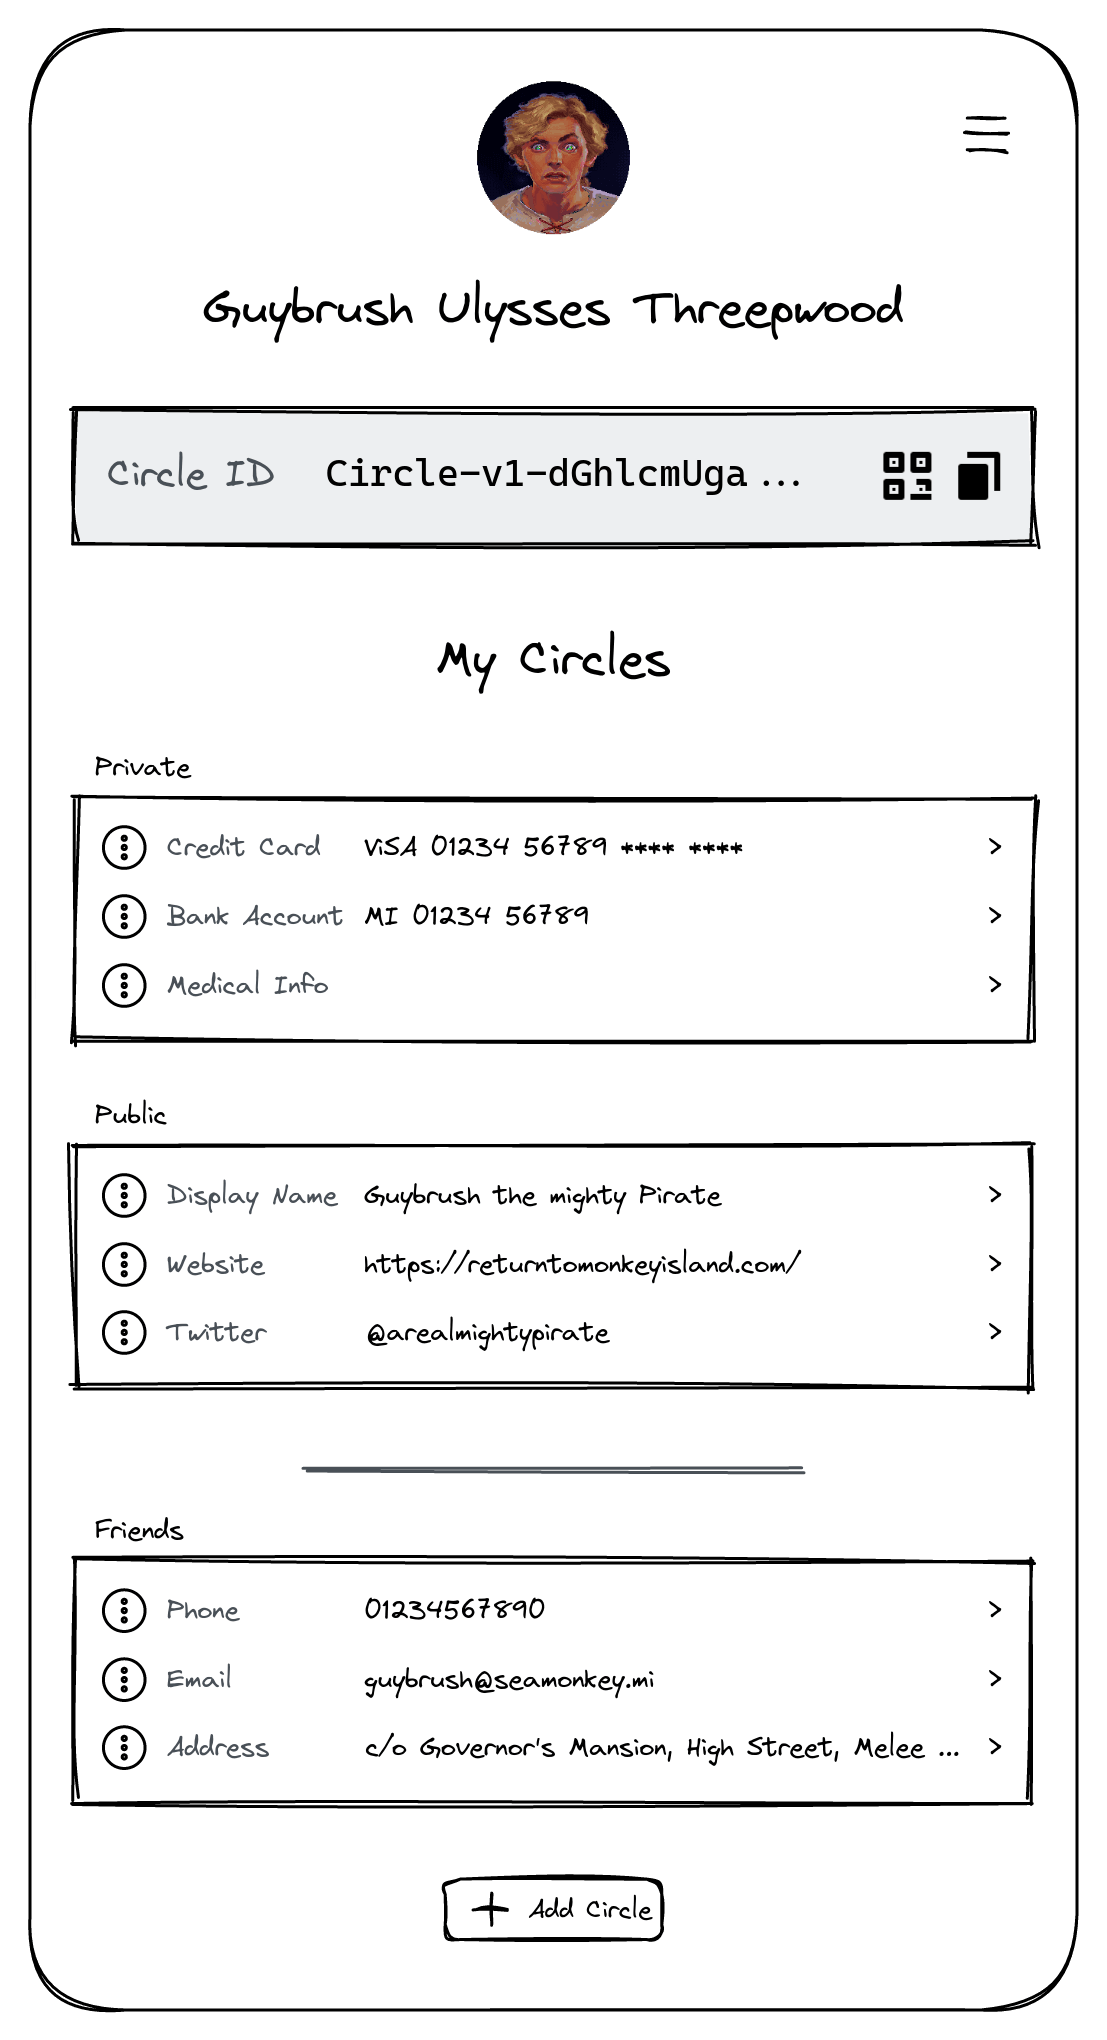 A mockup of a Circles UI, allowing a user to move their contact information into different circles